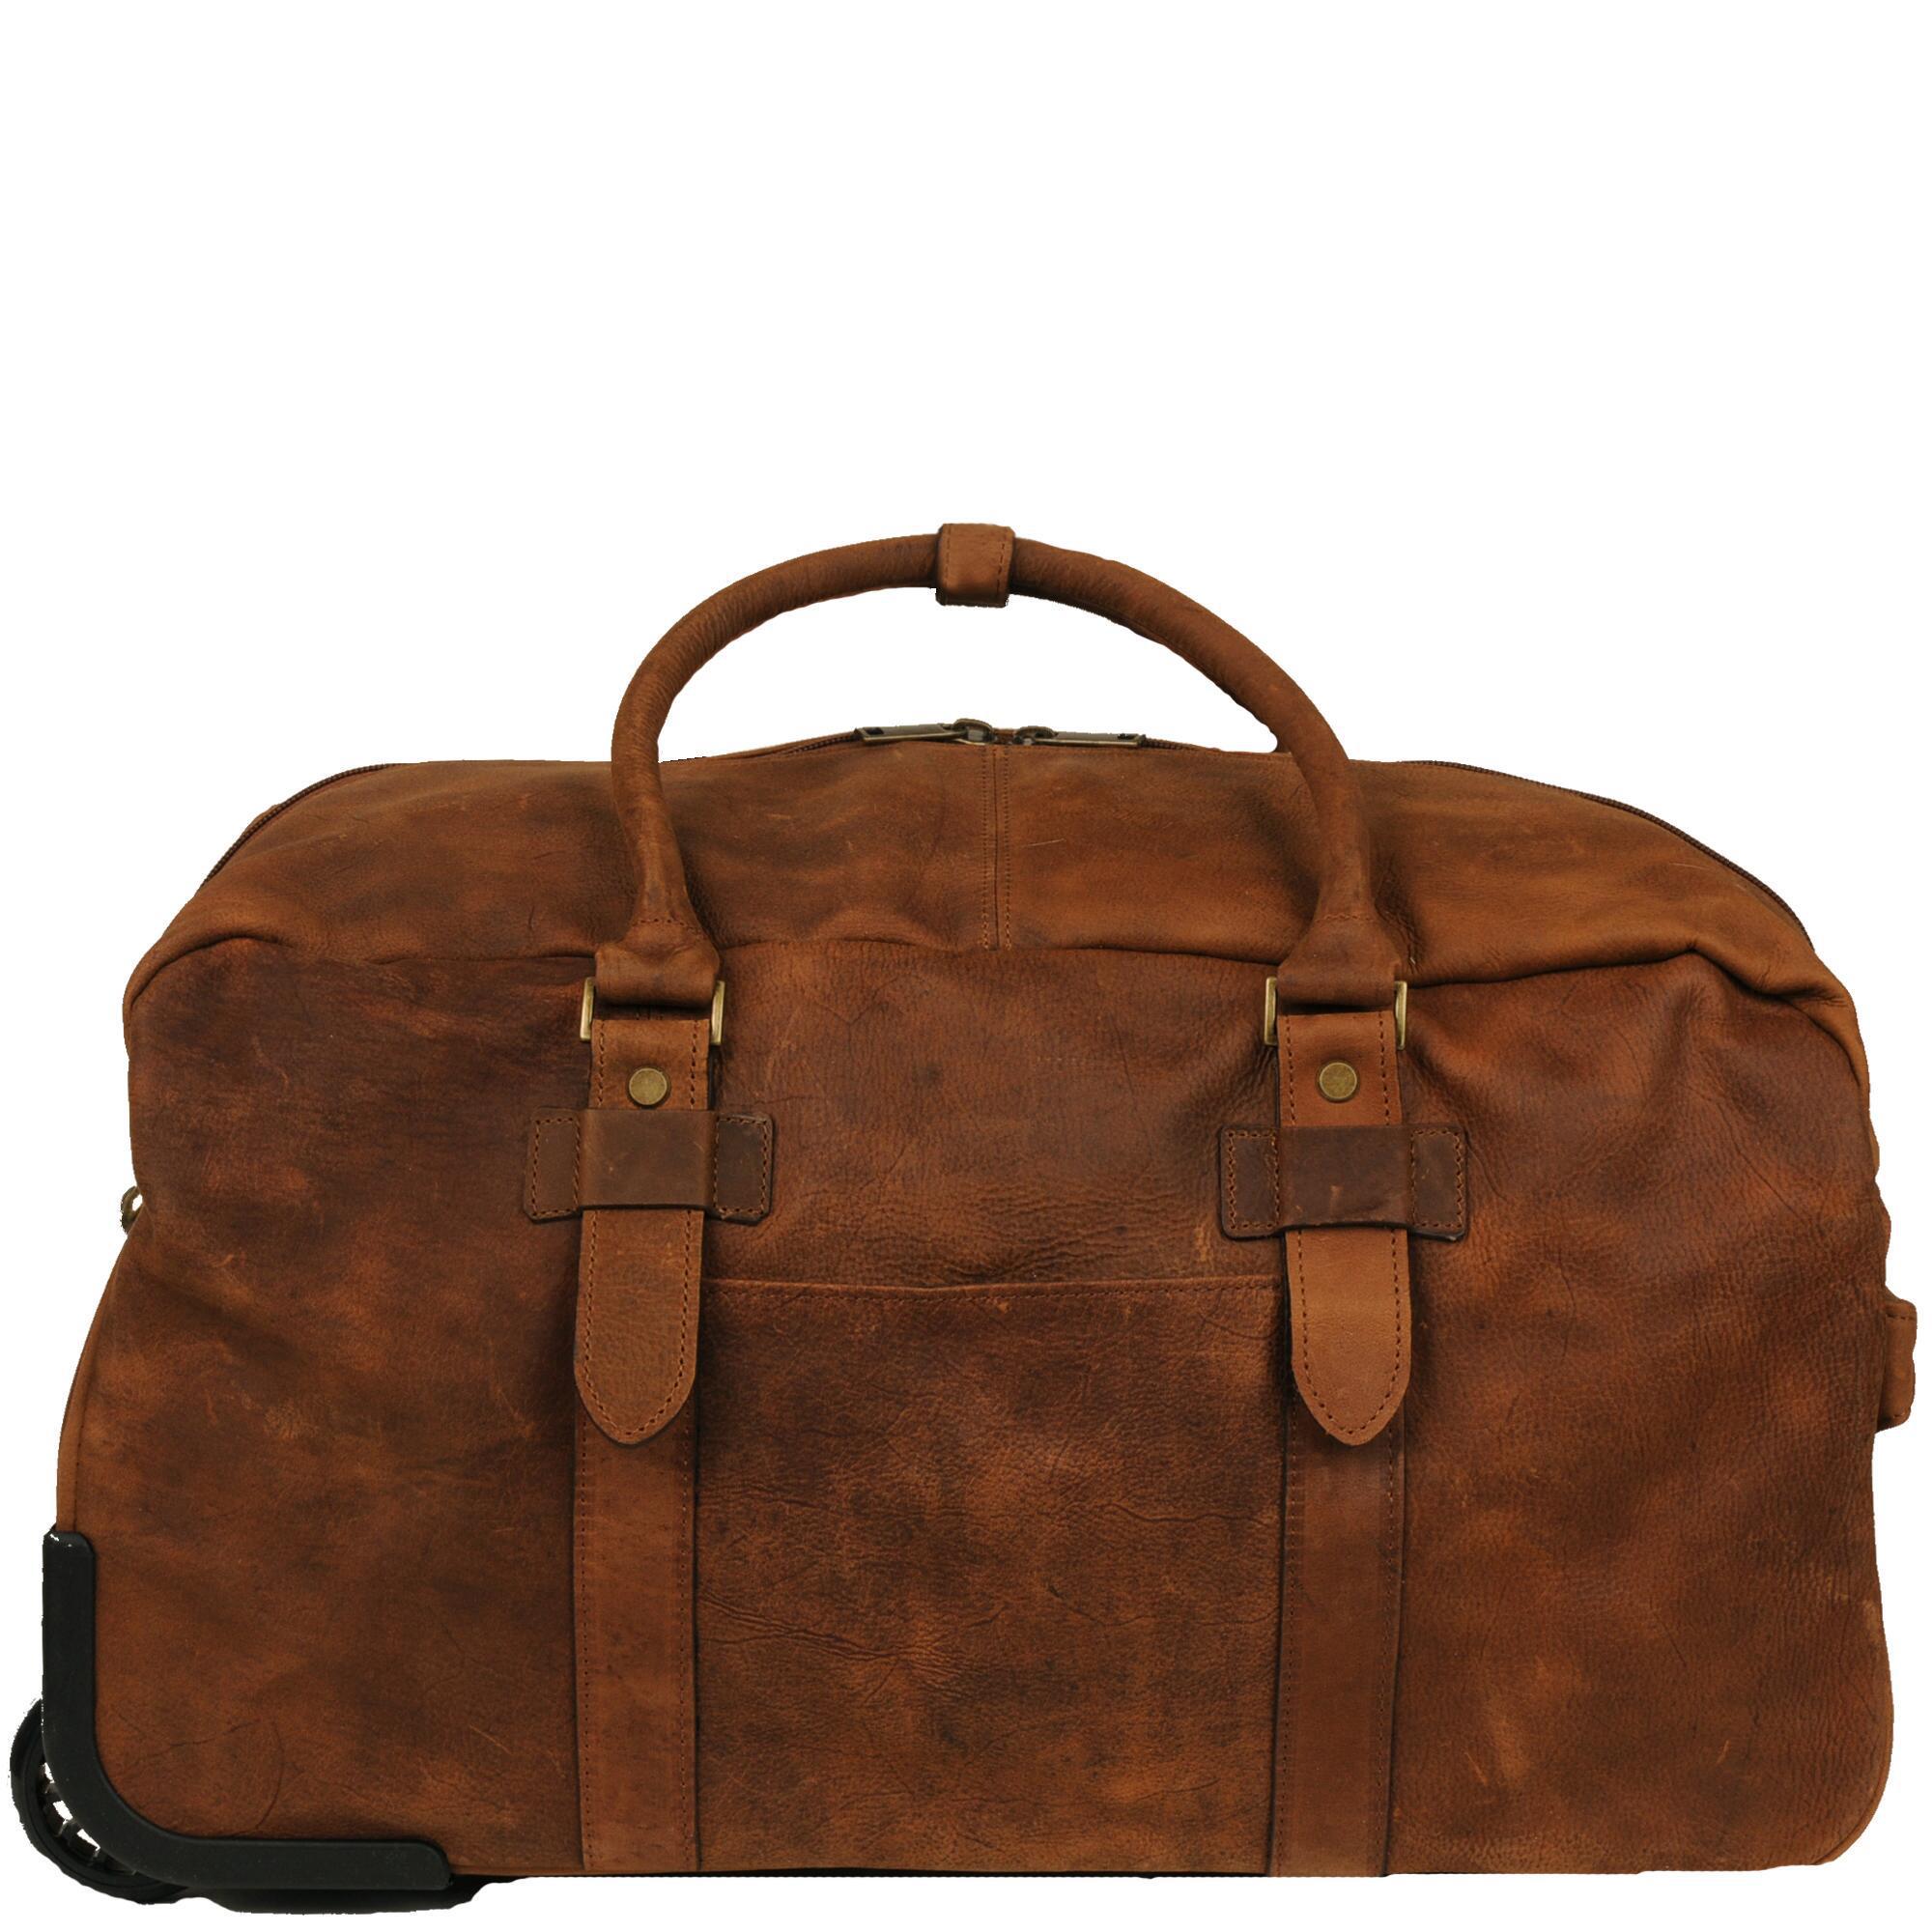 Lyst - Wilsons Leather Thunder Rolling Leather Duffel in Brown for Men